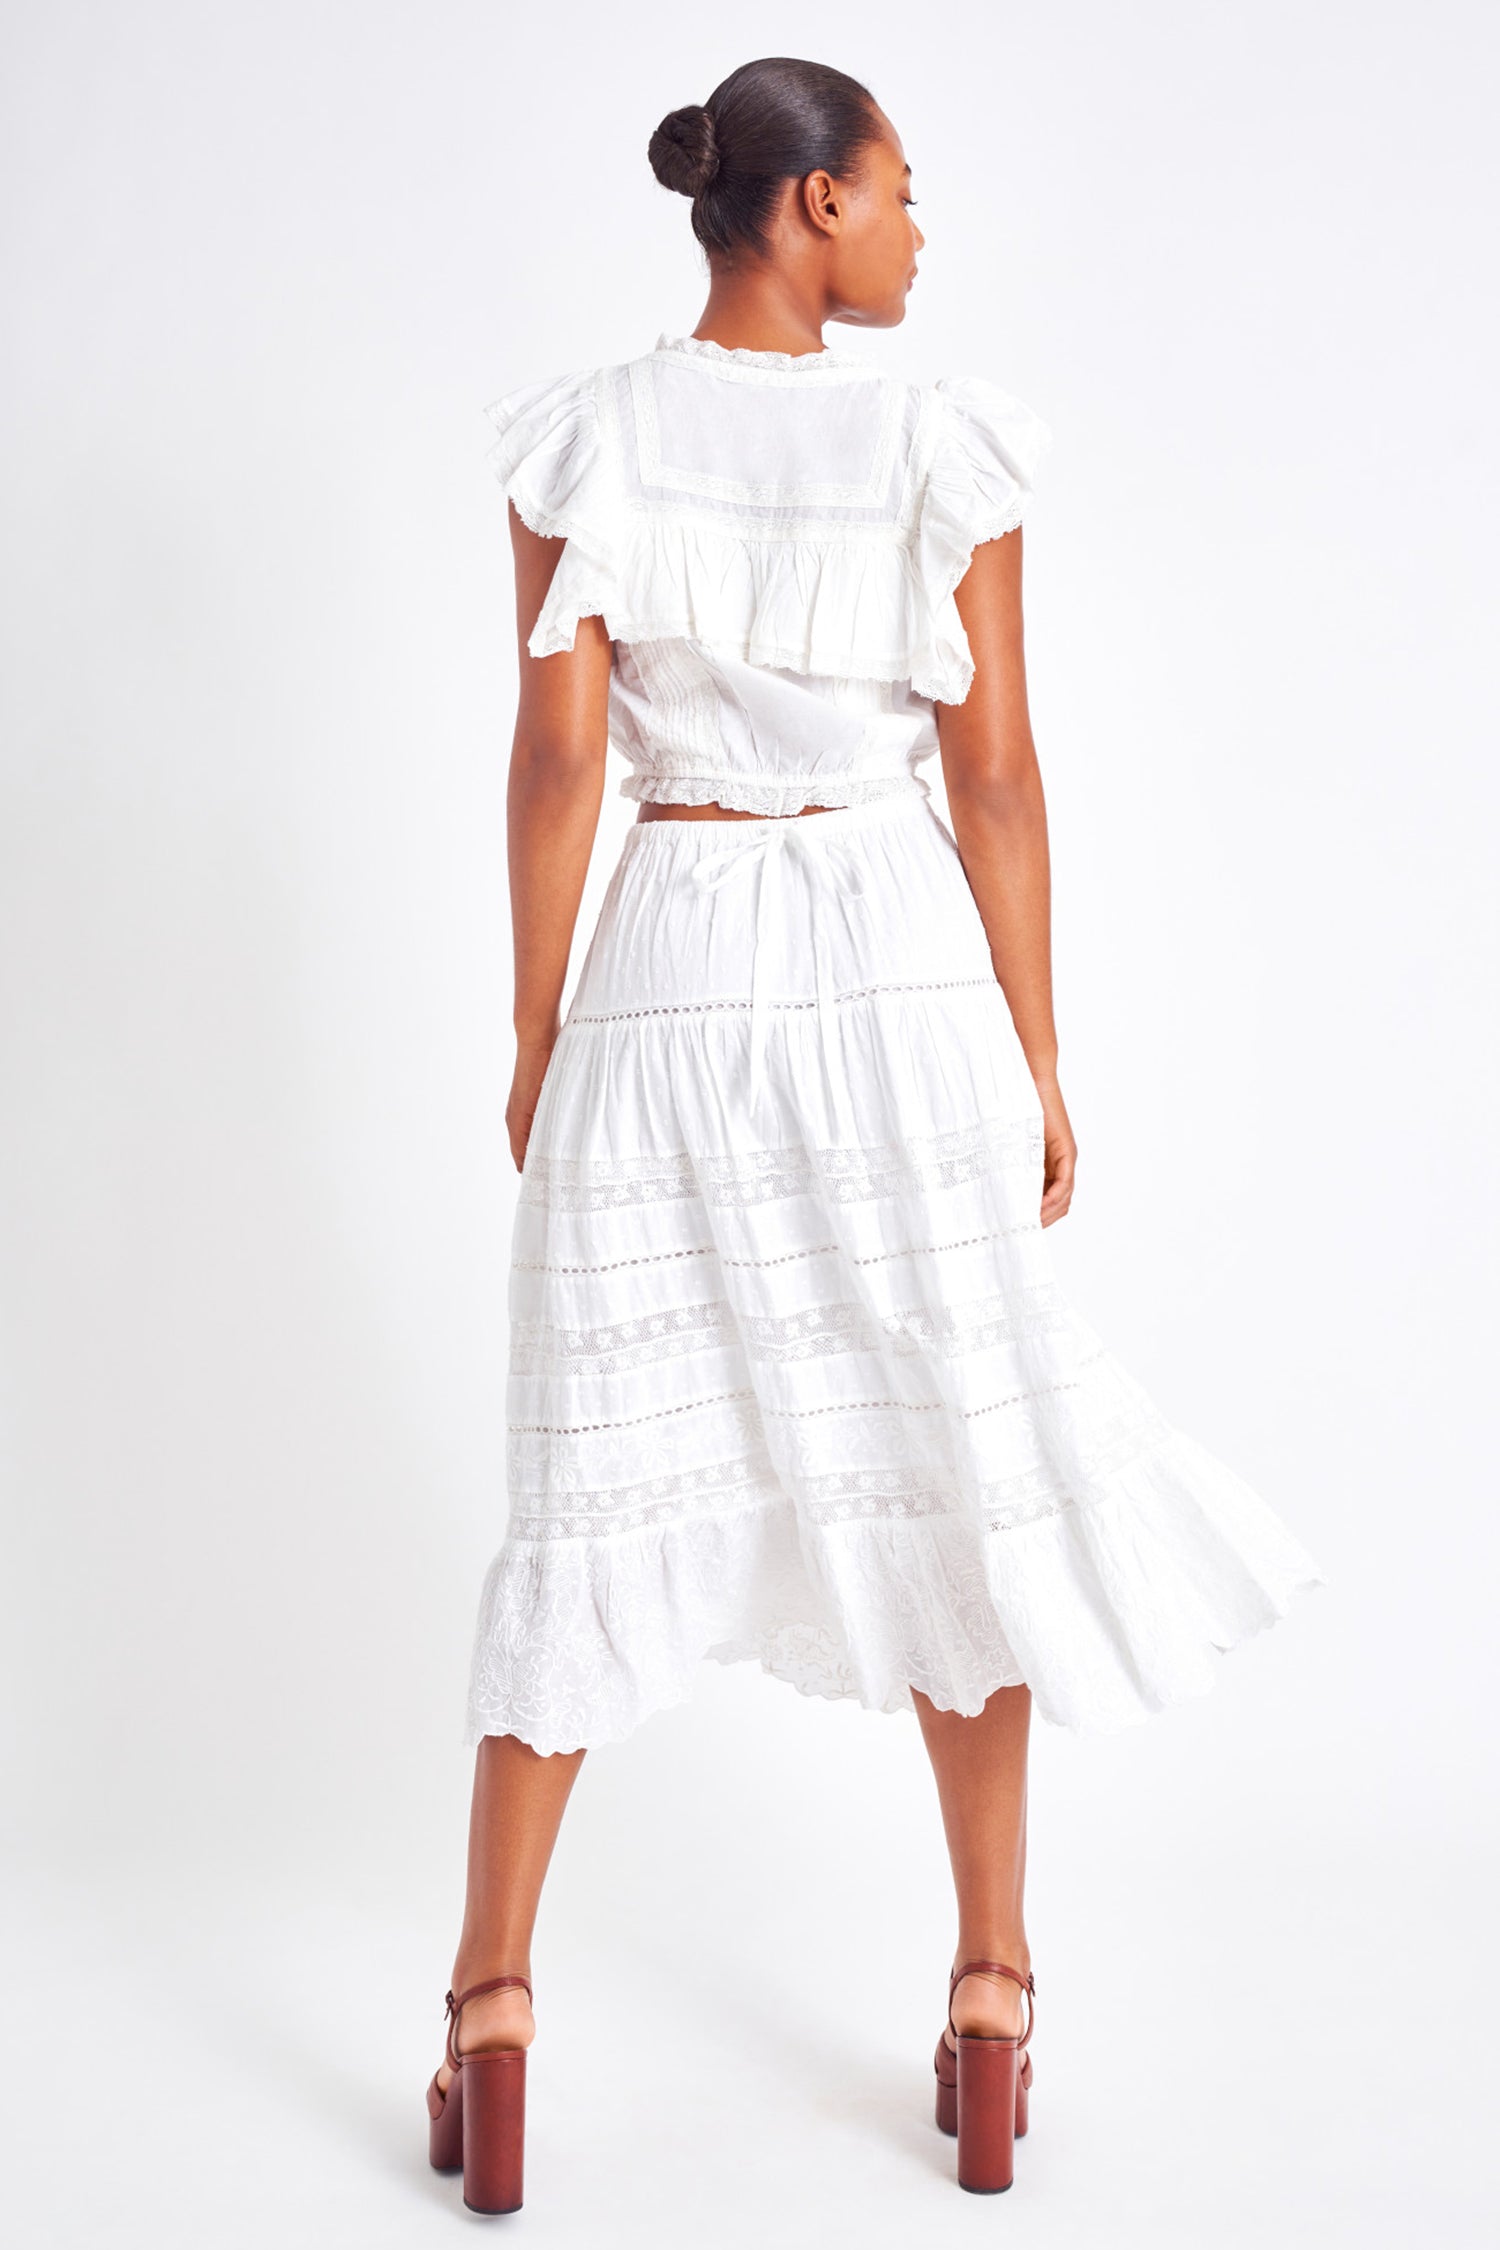 White midi skirt with lace detailing throughout the skirt as well as on the bottom trim